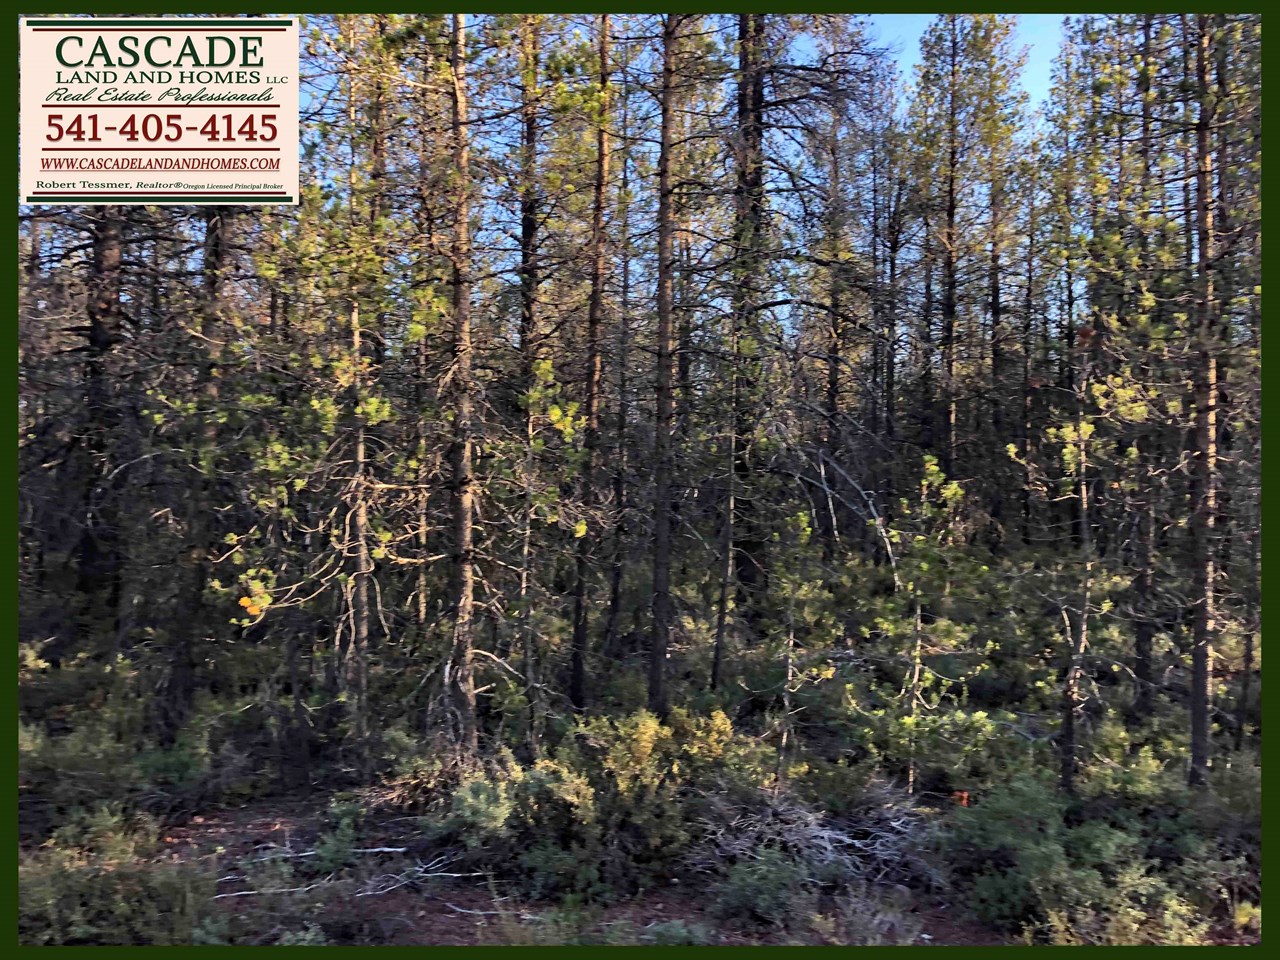 there is a diverse selection of trees on the property including lodge-pole pines. the understory is native low shrubs and grasses. the soil is volcanic loam and a layer of mulch from the needle cast of the pines.